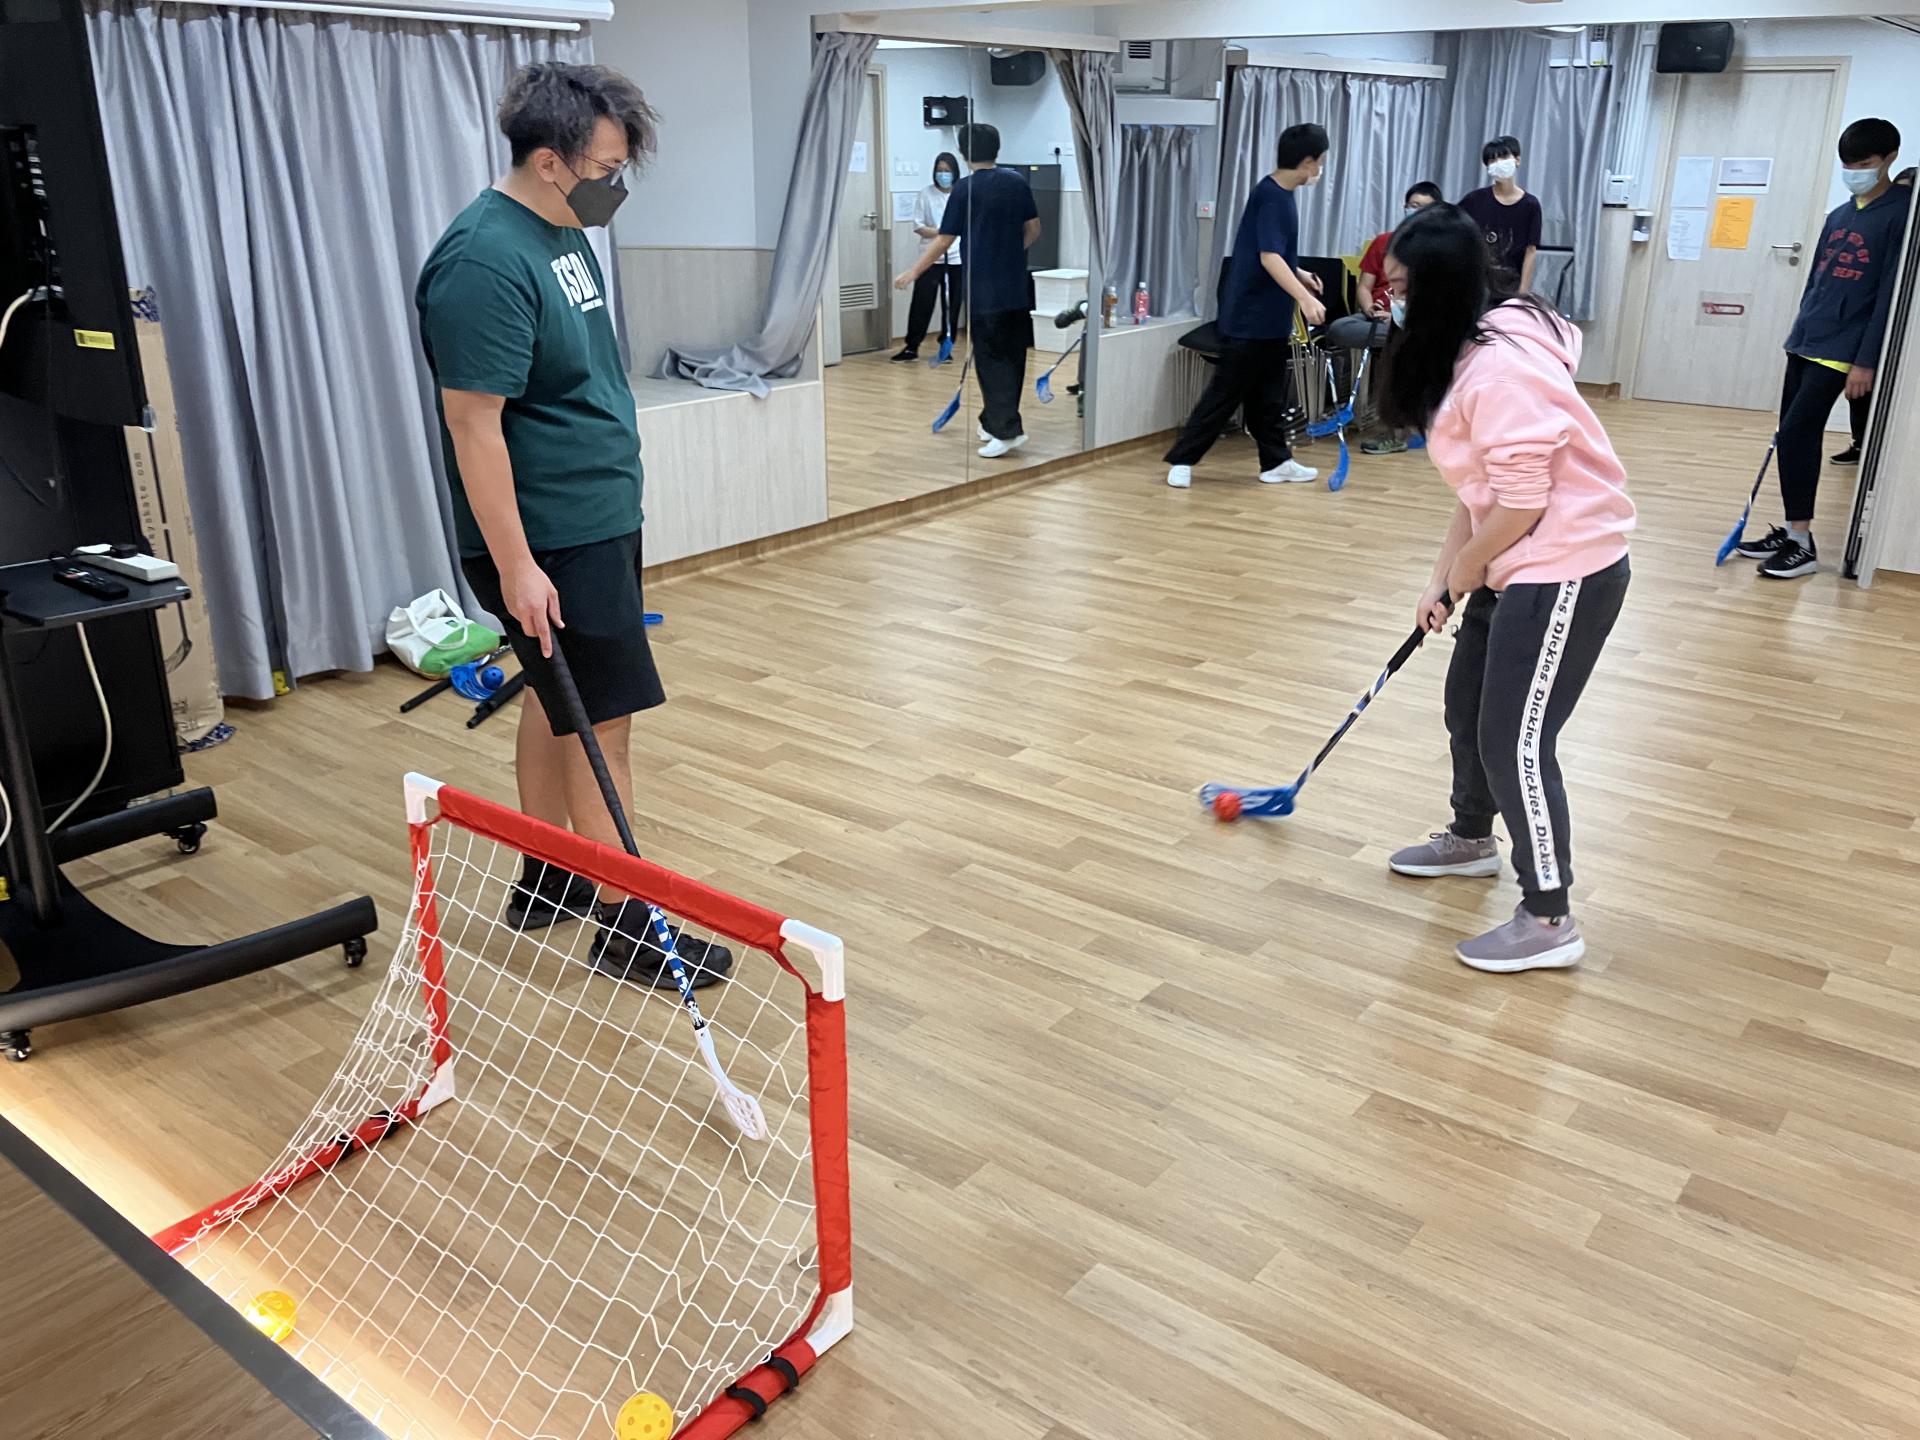 Sports and Physical Lesson: Floorball